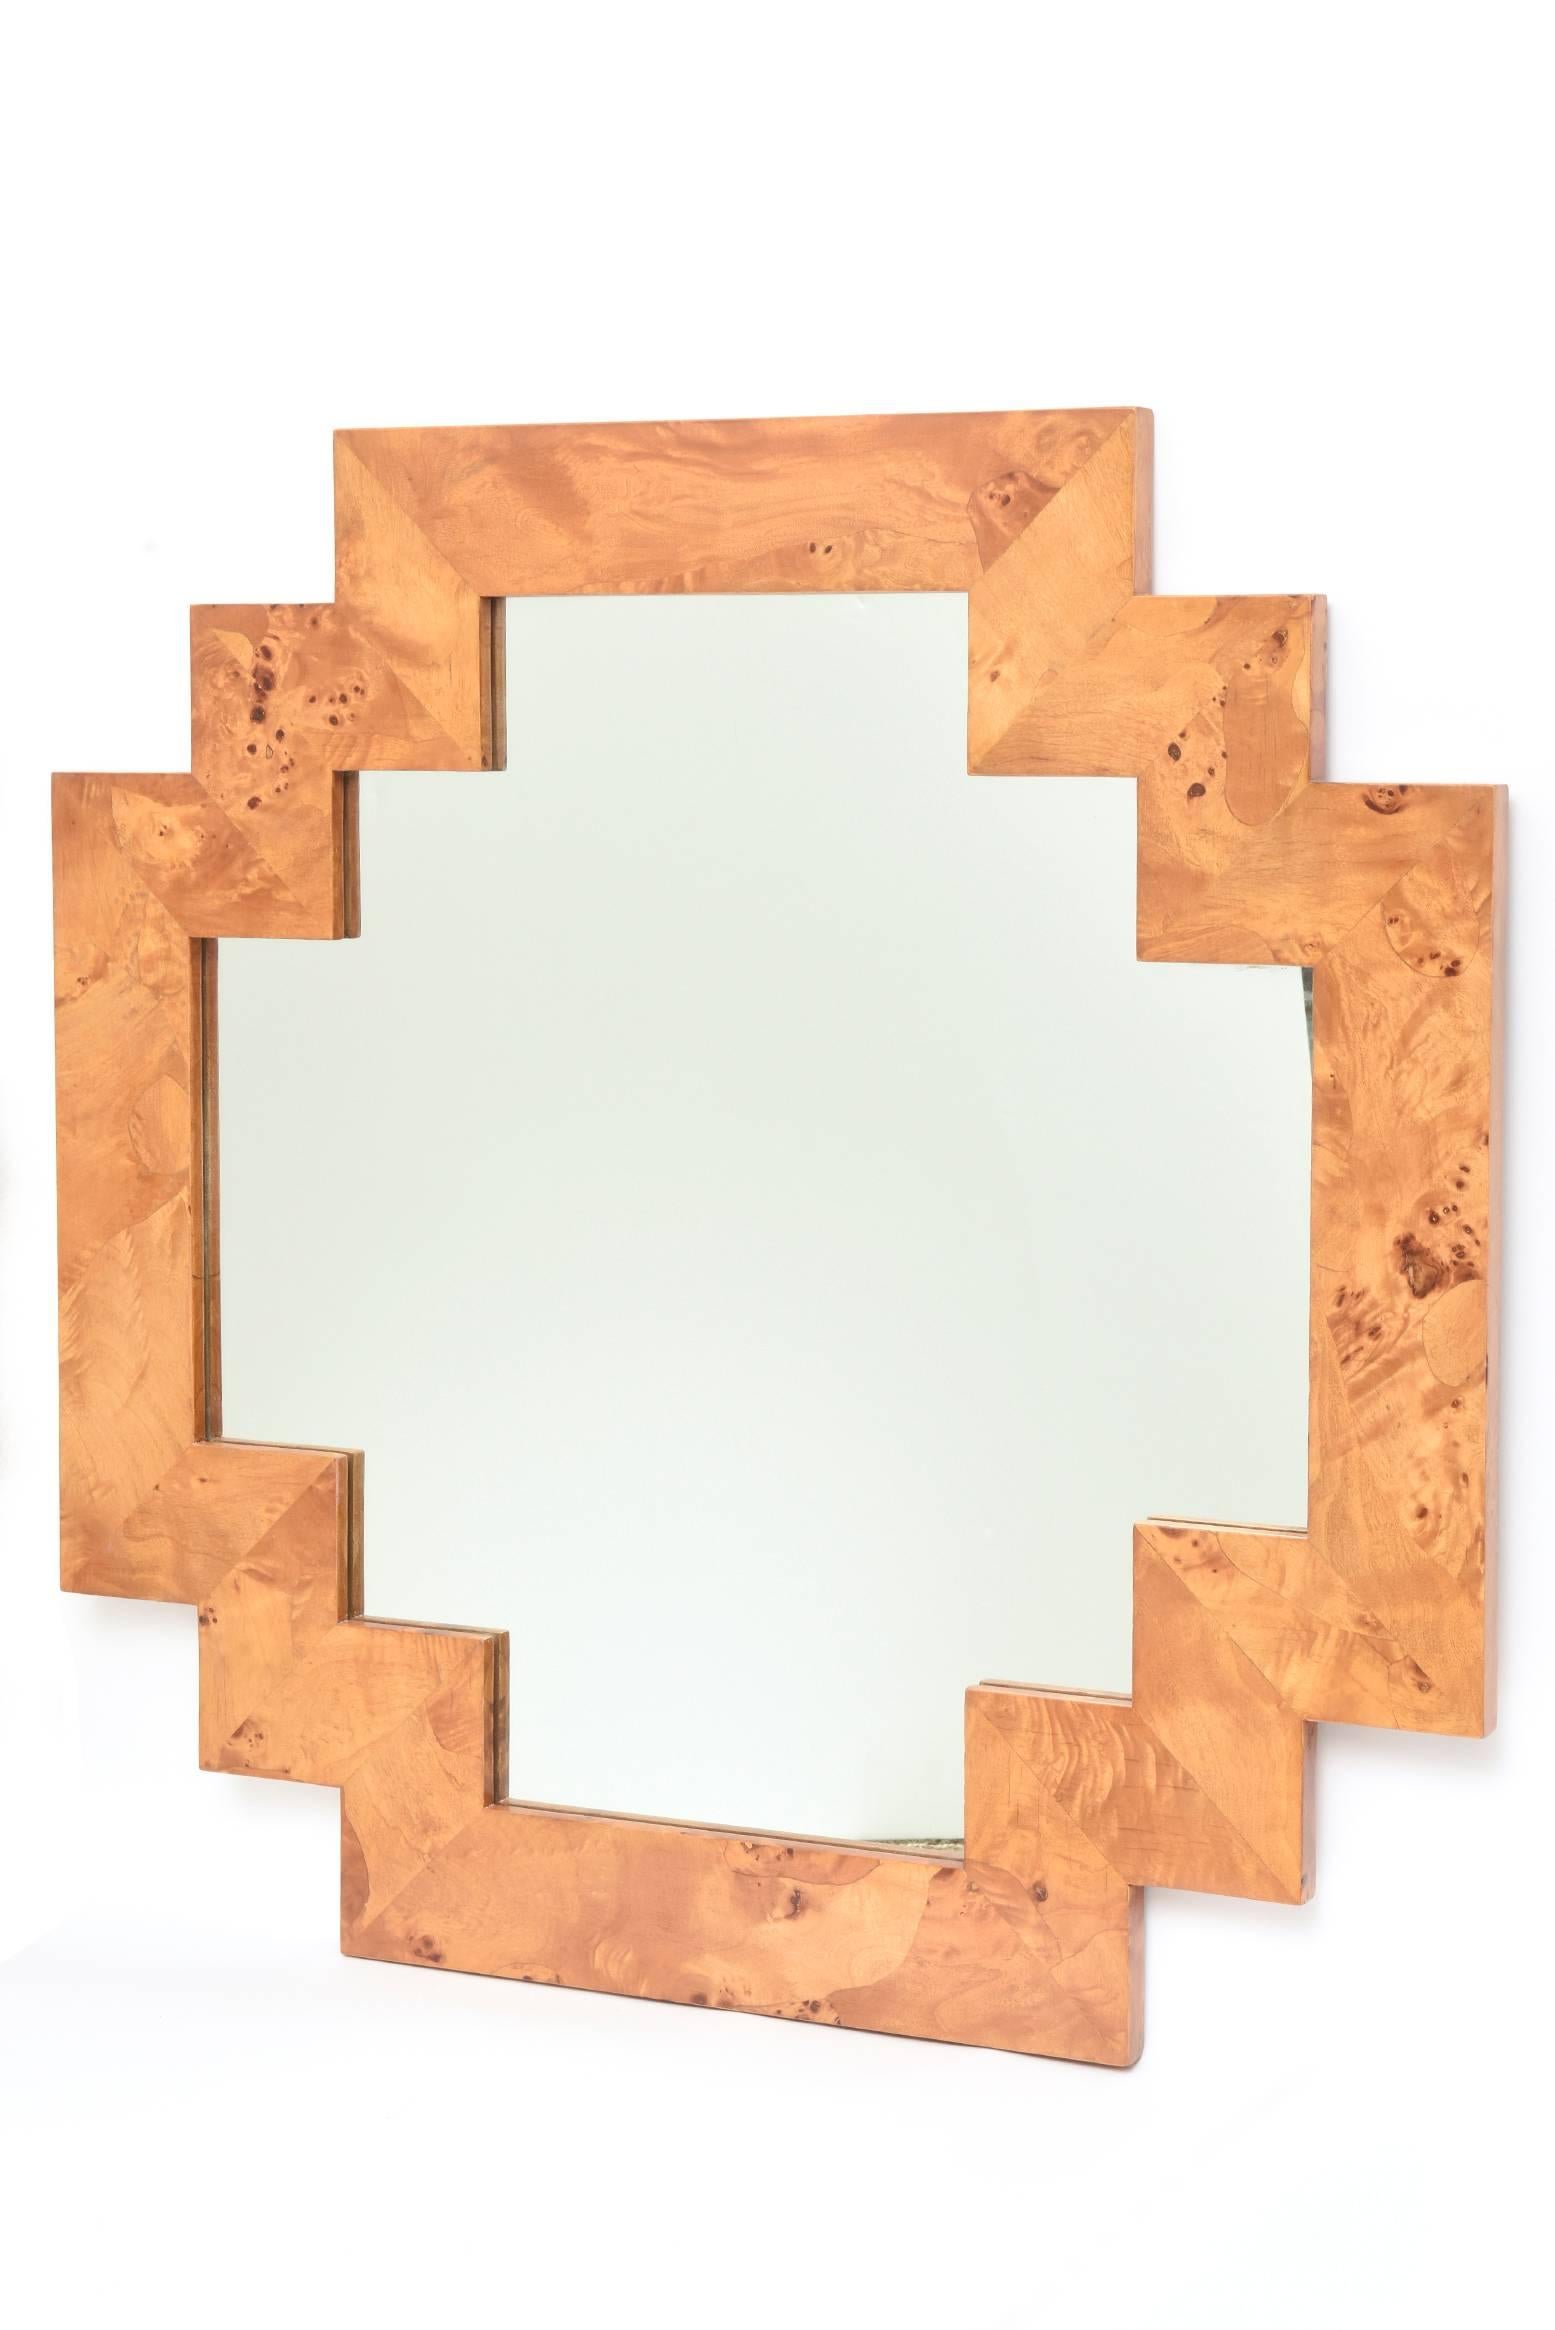 This gorgeous Italian geometric vintage step burled elmwood mirror is a knockout! This is great over a console or cabinet or by itself. It is marked Italy on the back. The wood has been restored with the same satin finish that was original to the